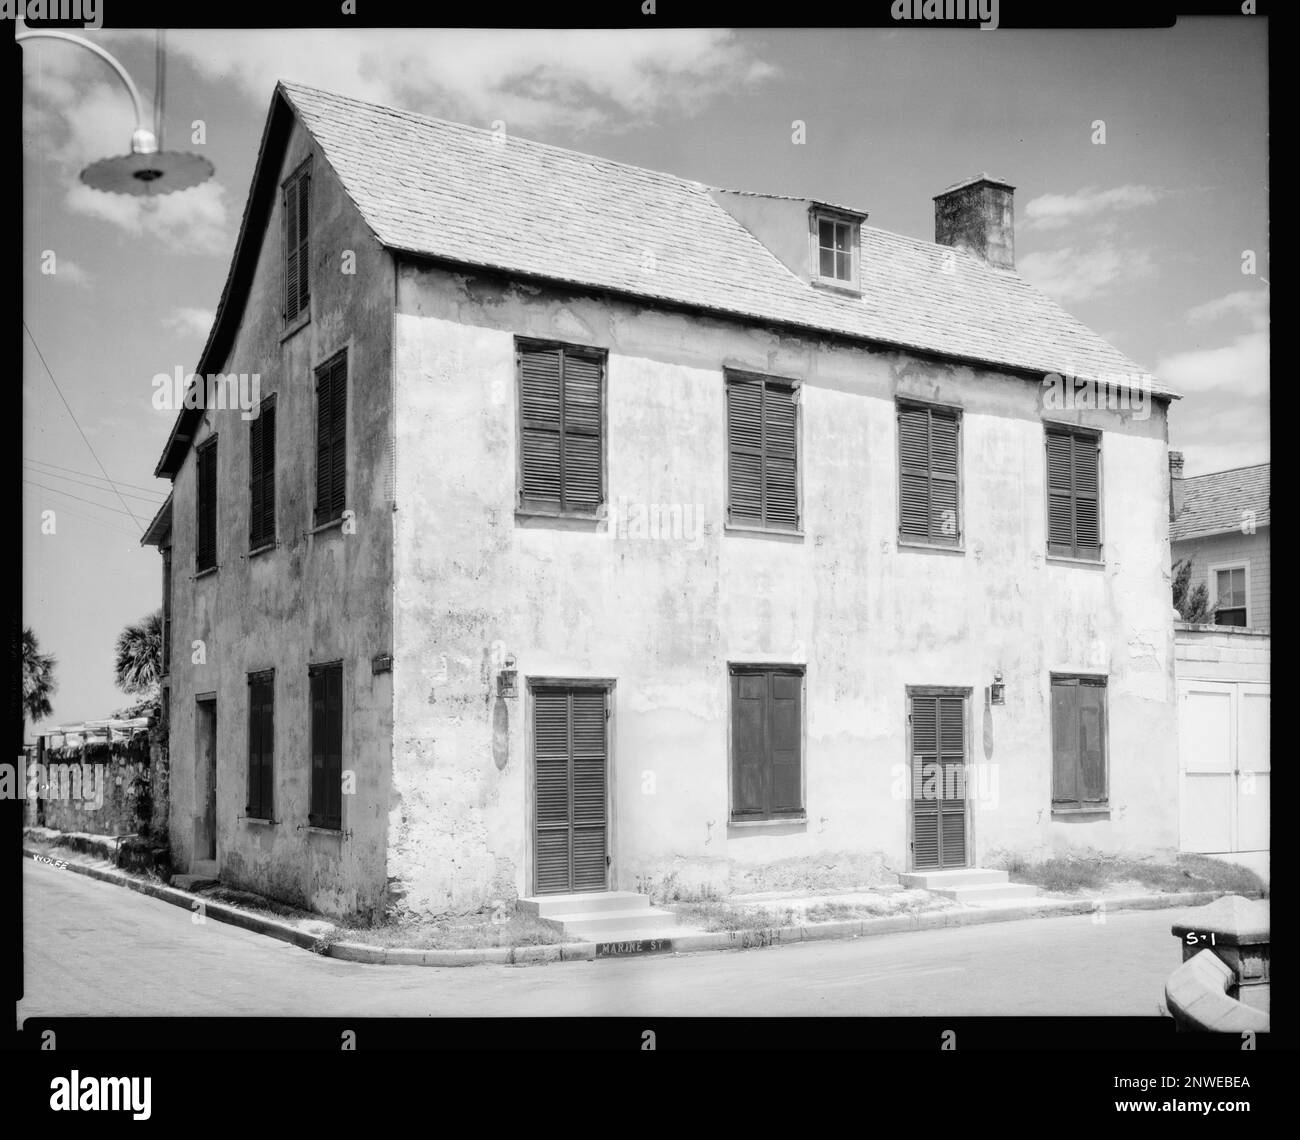 Sanchez House, St. Augustine, St. Johns County, Florida. Carnegie Survey of the Architecture of the South. United States, Florida, St. Johns County, St. Augustine,  Houses. Stock Photo